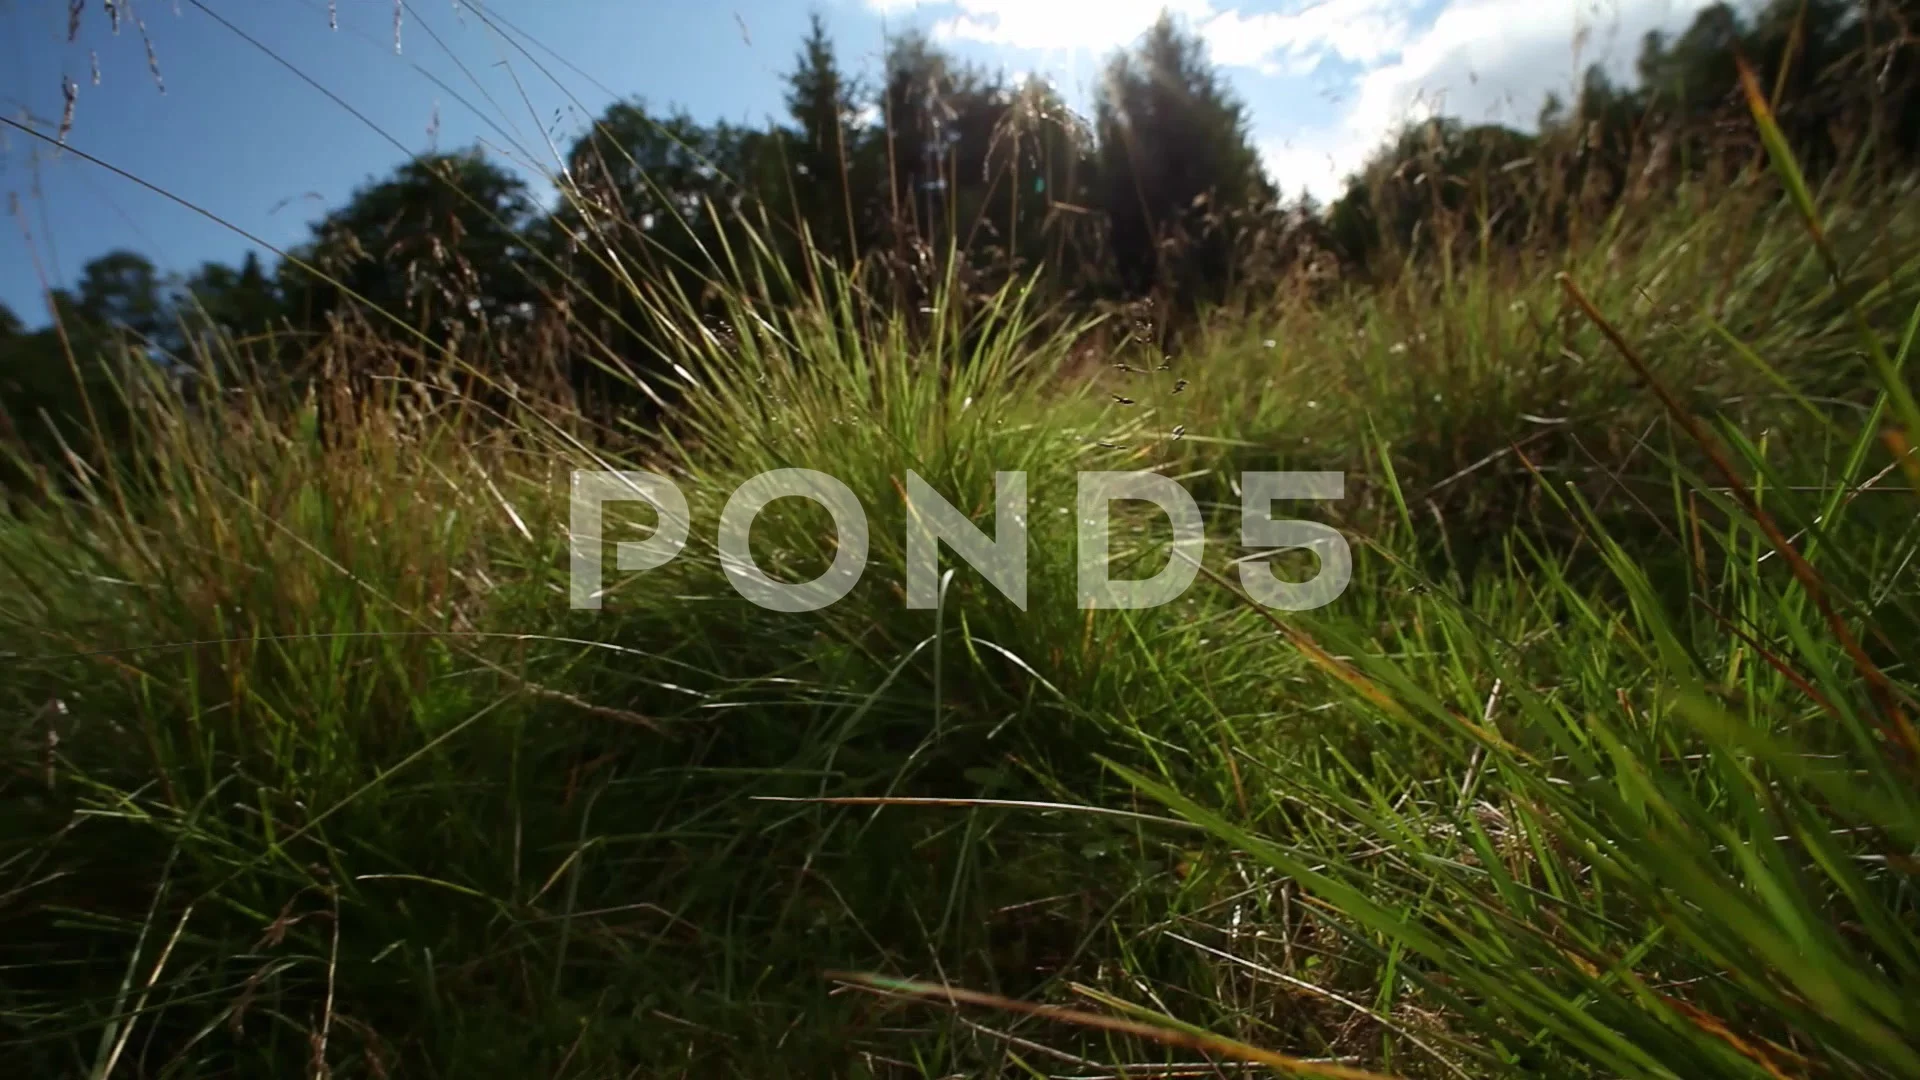 Mouse point of view: moving through a gr... Video | Pond5